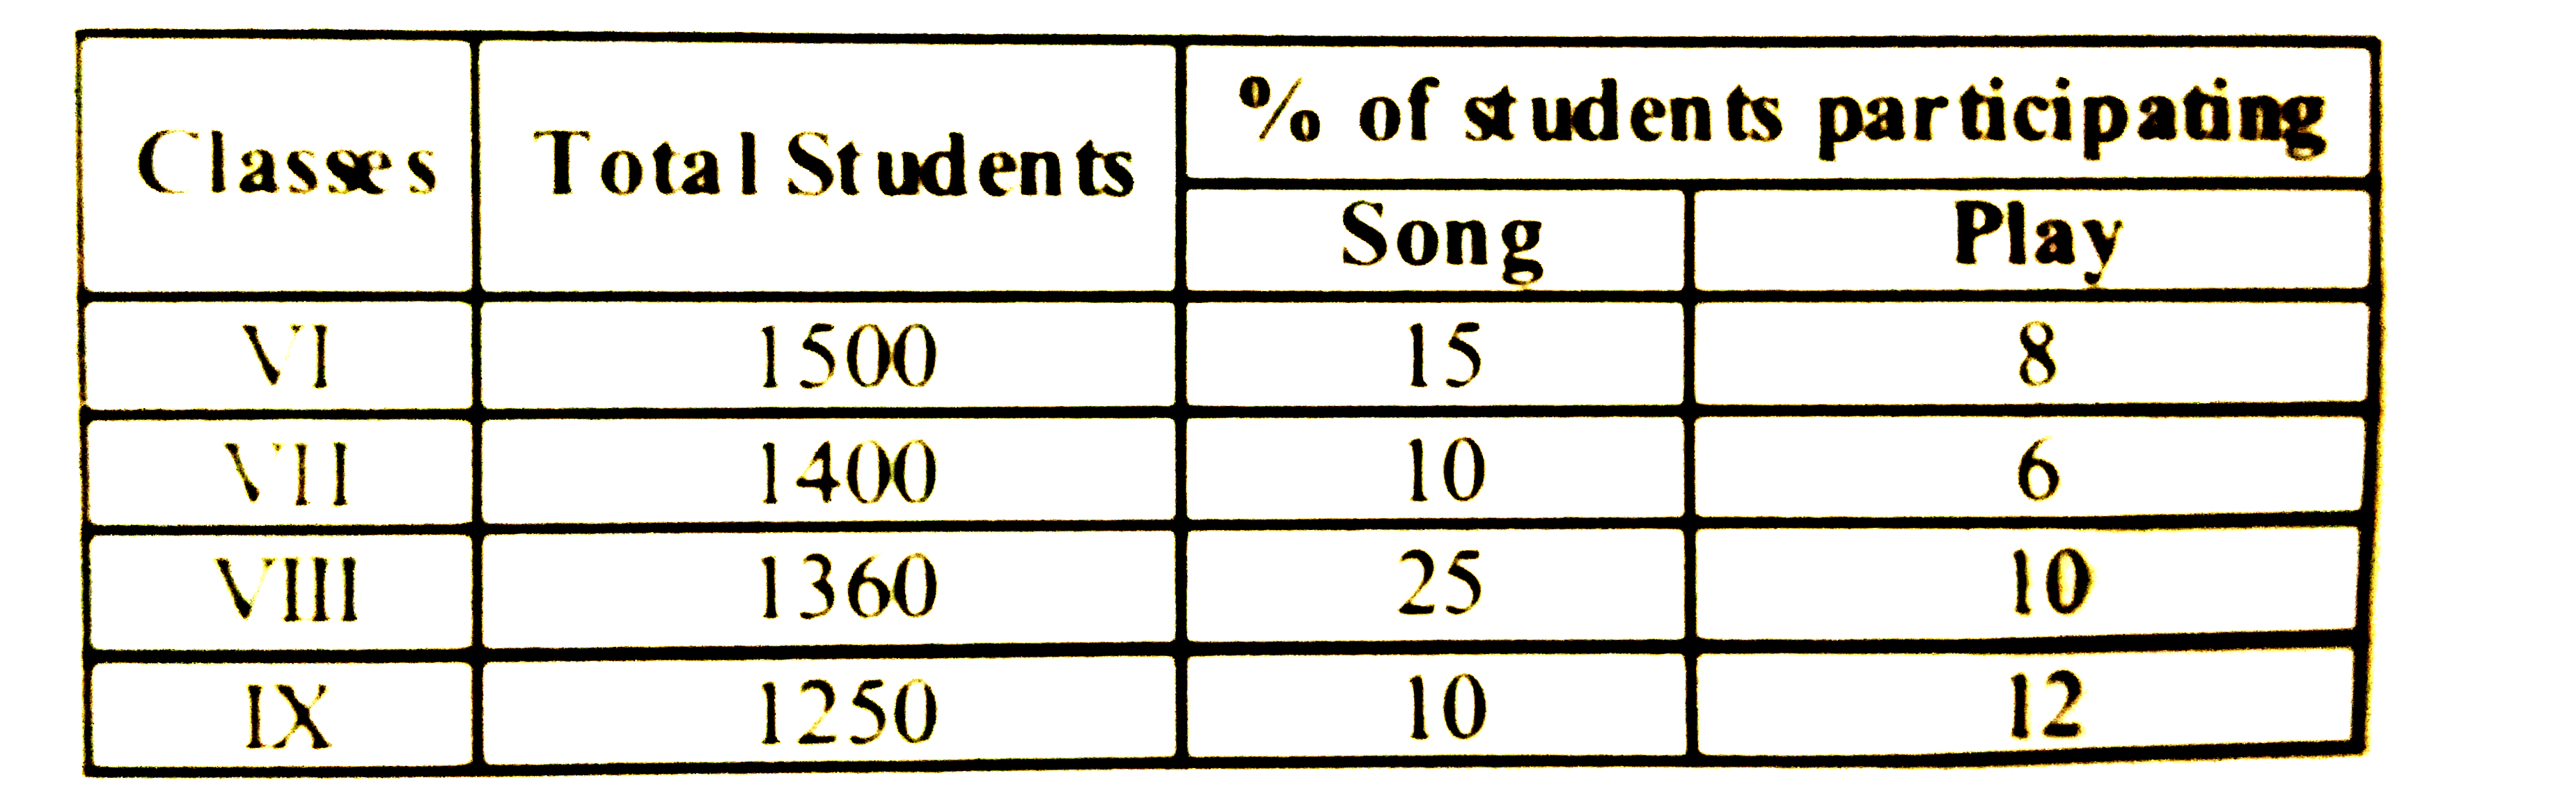 What is the sum of students who do not participating in Song from class VI and IX together ?